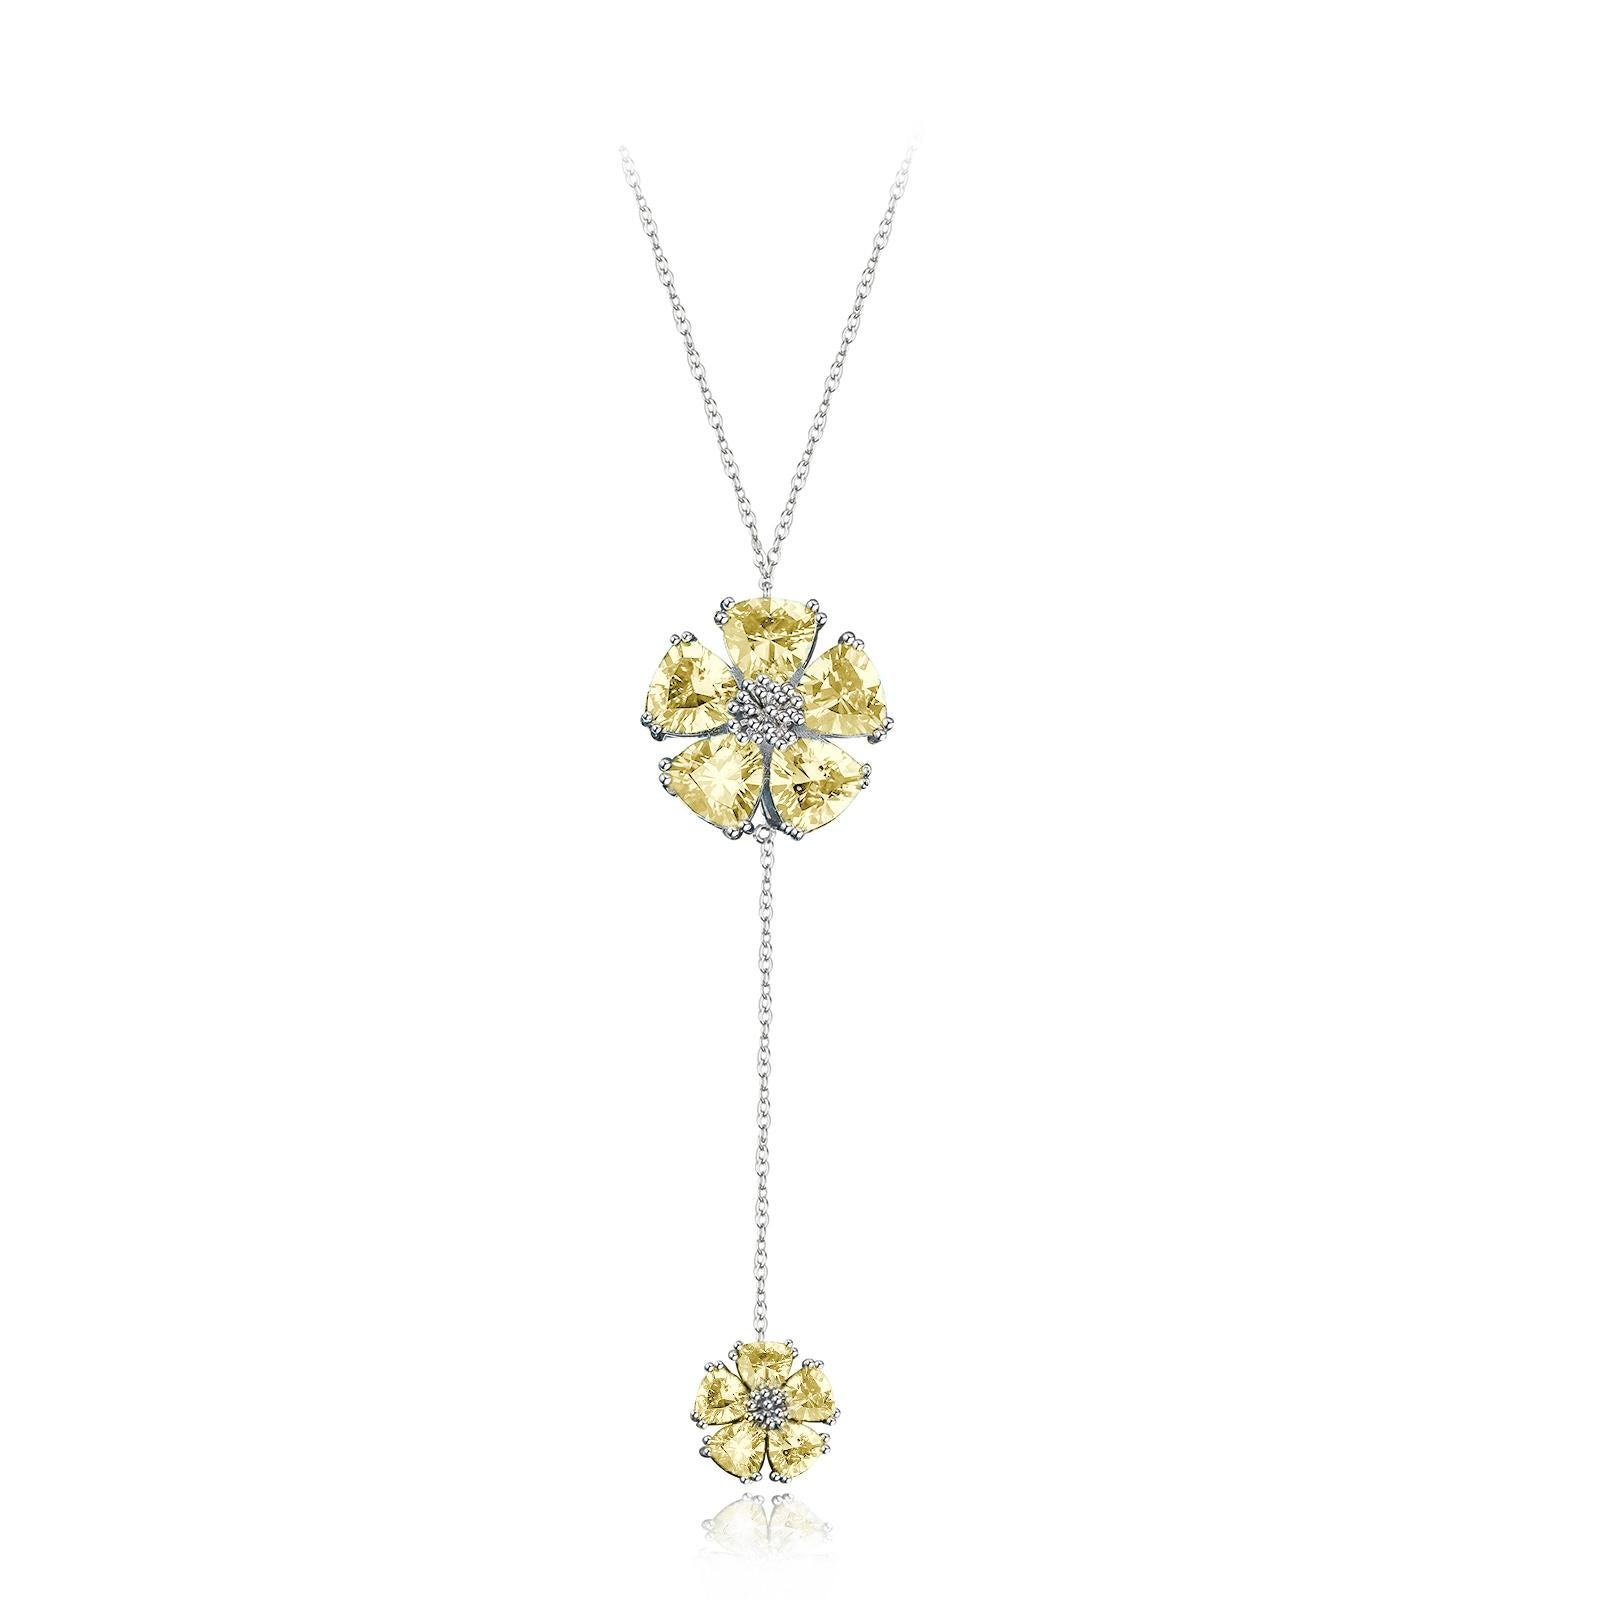 White Topaz Large Double Blossom Lariat Necklace For Sale 2